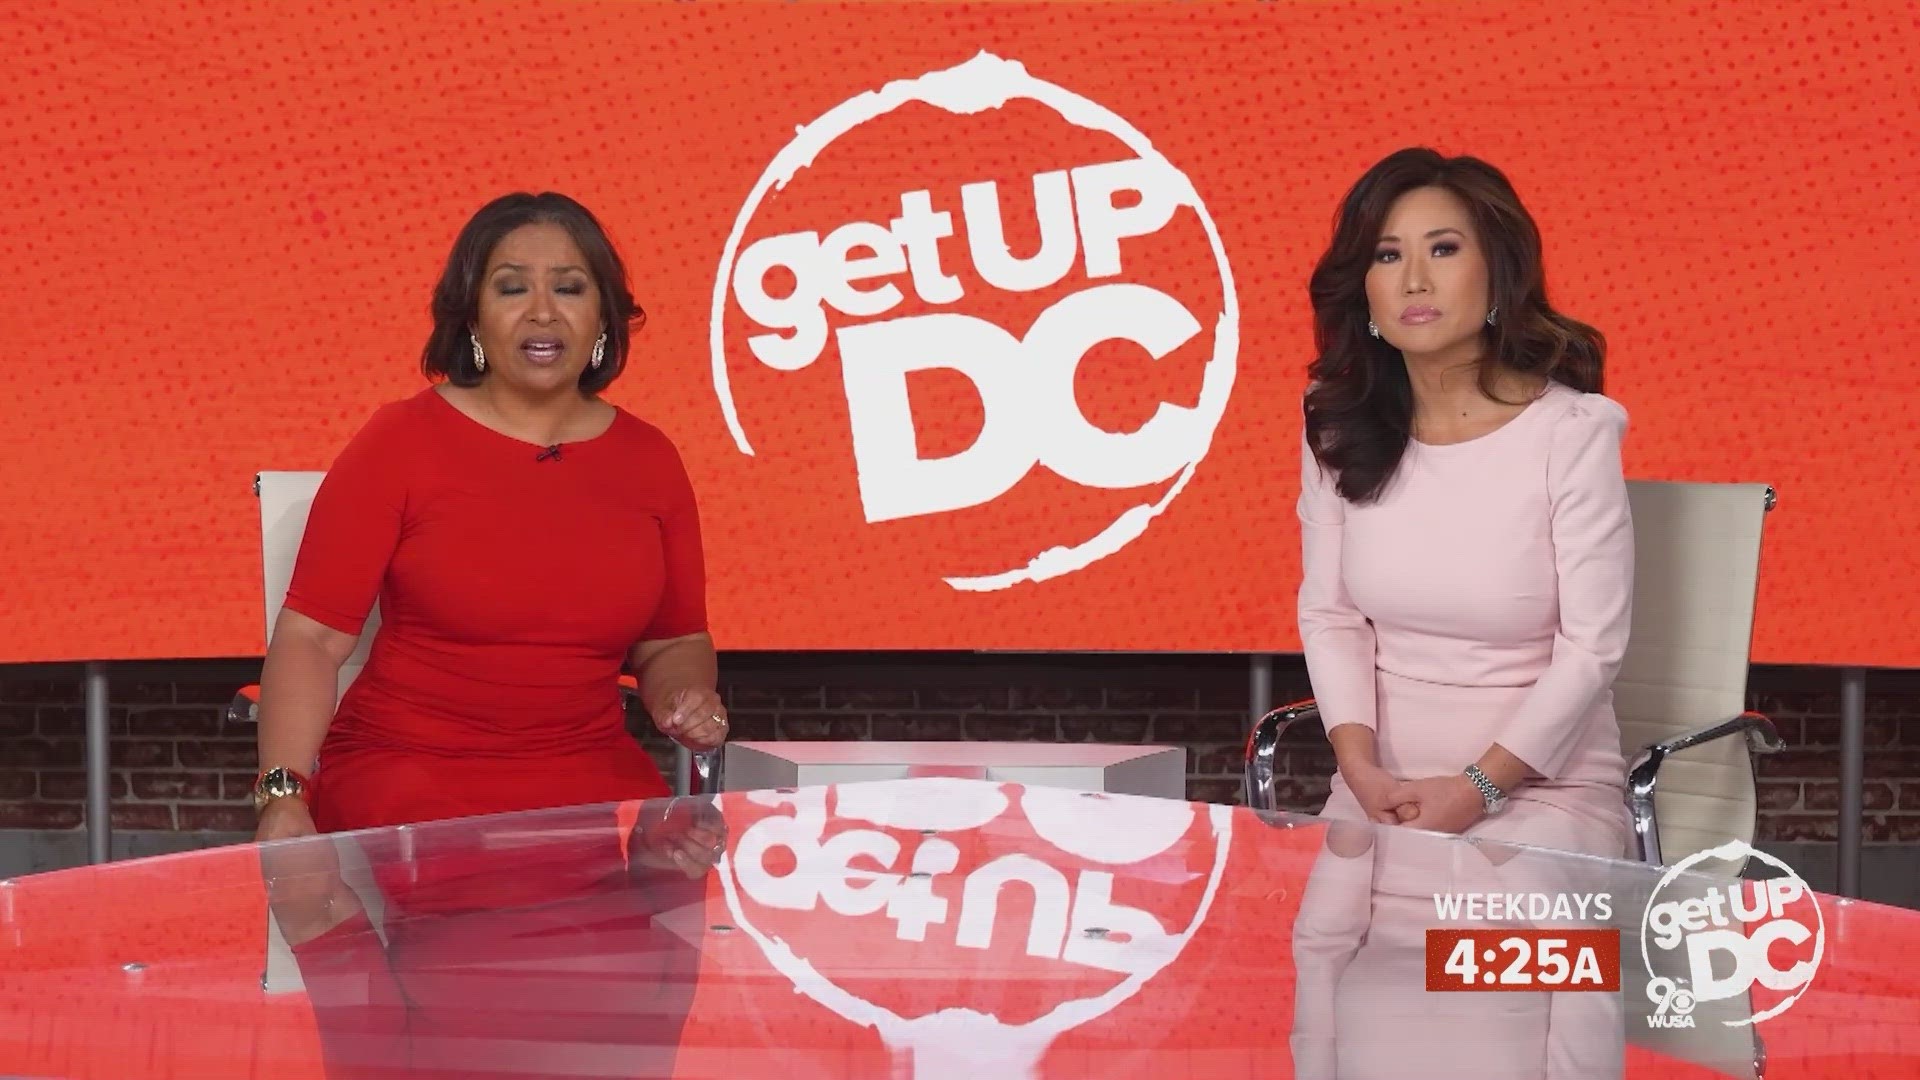 Watch Get Up DC Weekedays 4:25am-7am. Or stream anytime on WUSA9+